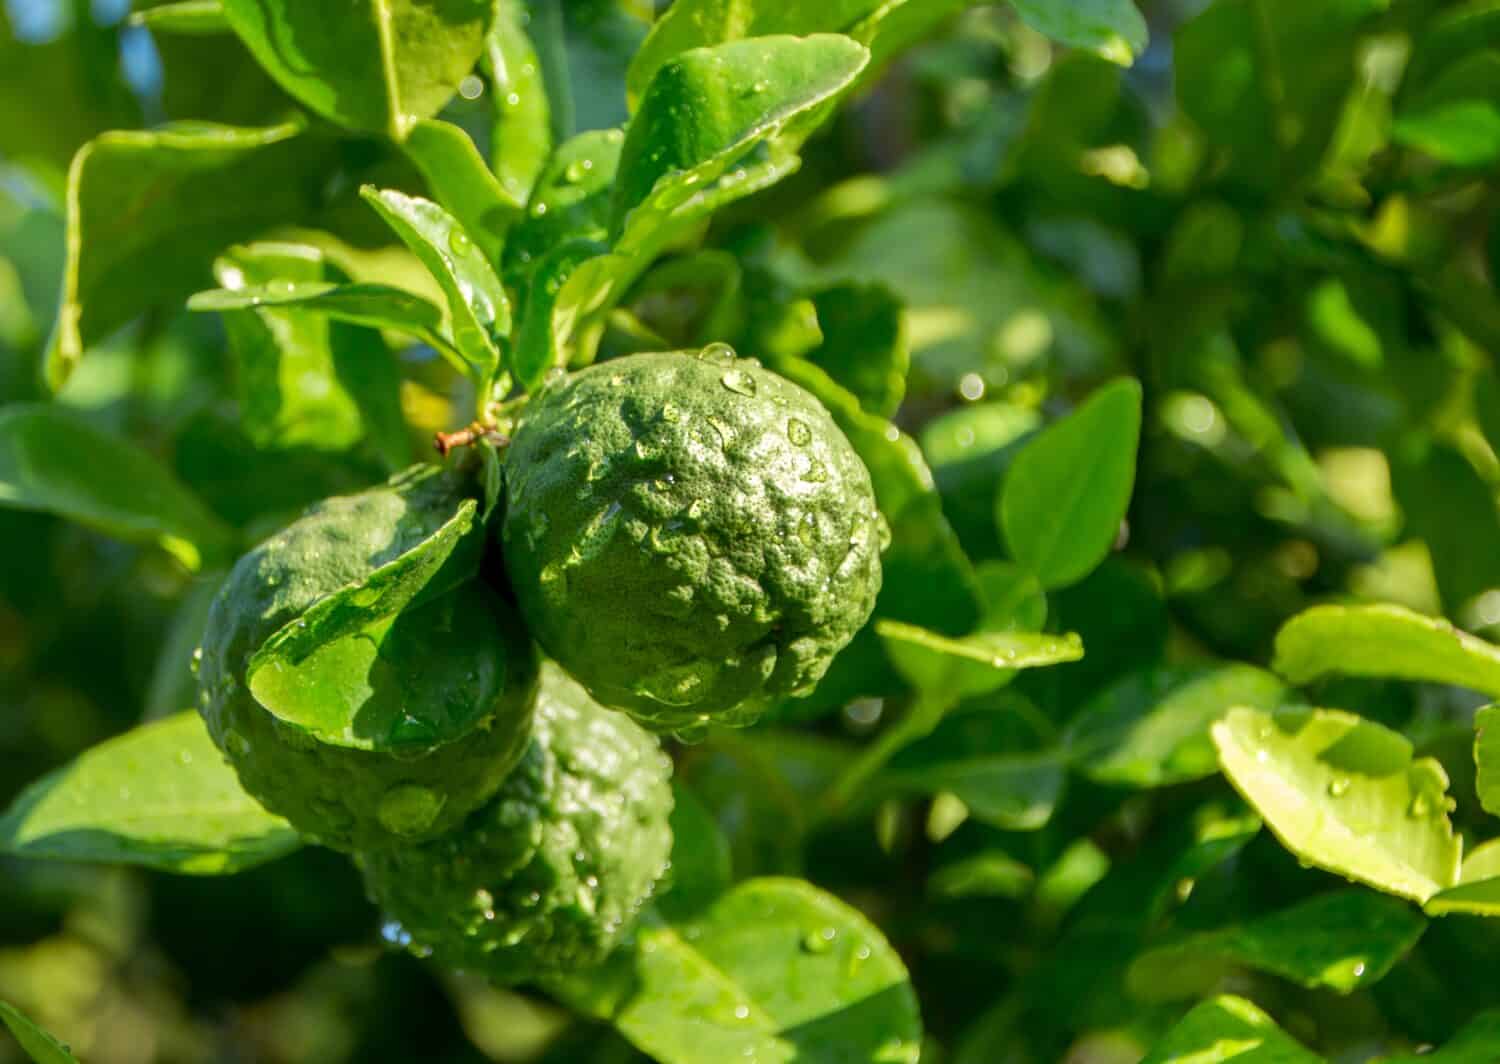 Bergamots are fresh, bergamots with the leaves, Water drops on Bergamots, Vegetable and Herb or odoriferous, bergamot Thai fruits are fragrant and sour.